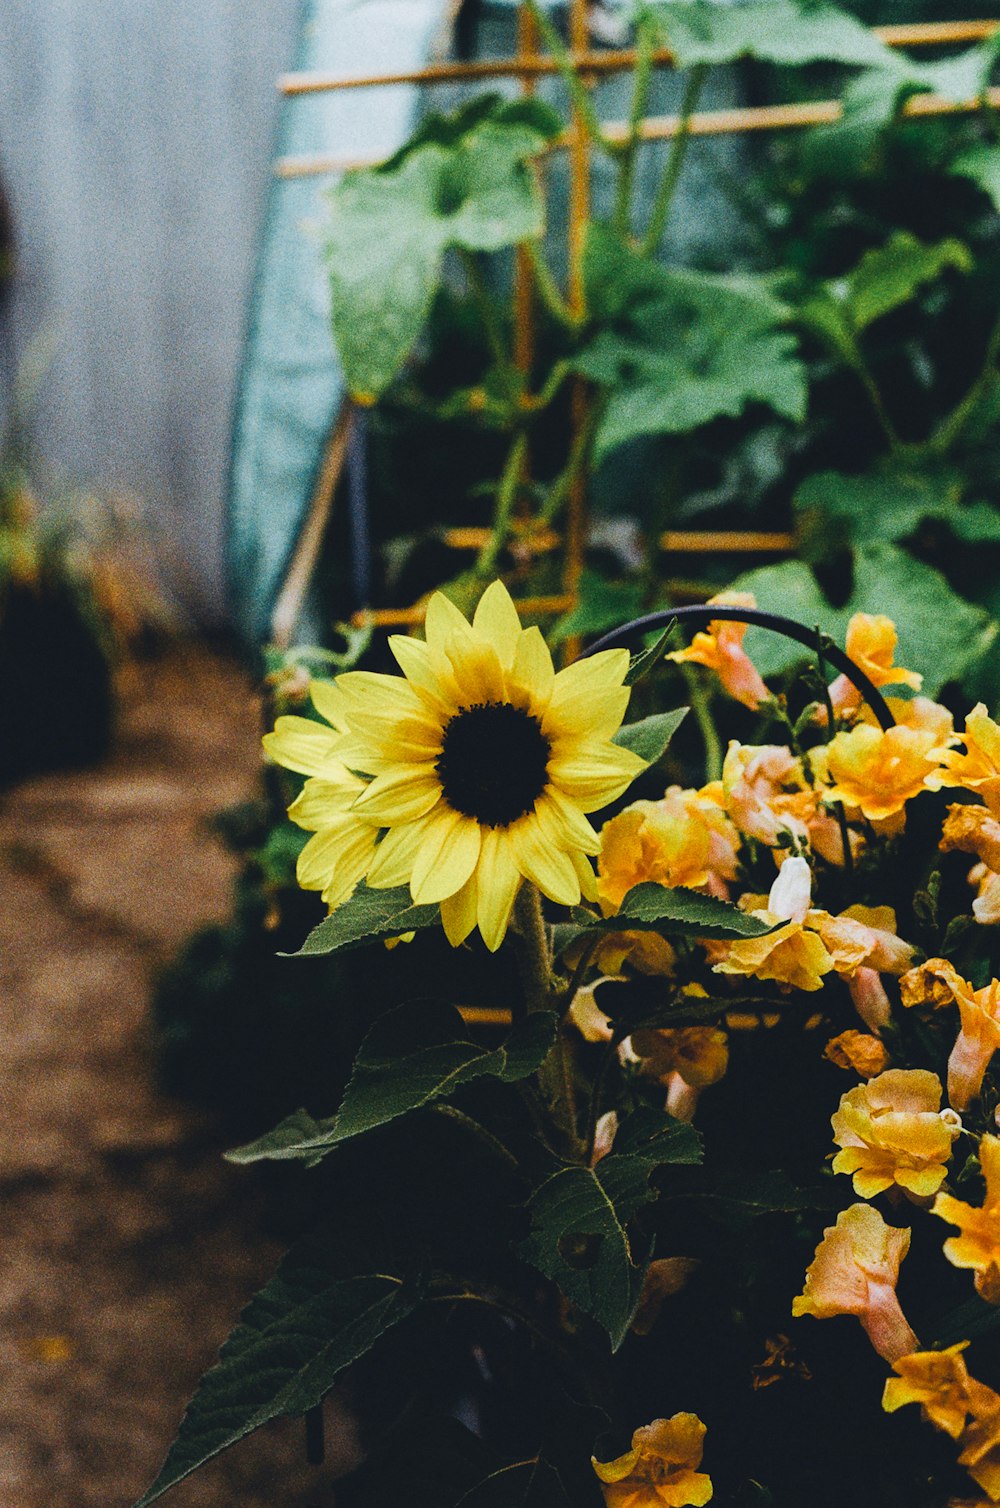 a sunflower in a greenhouse with other plants